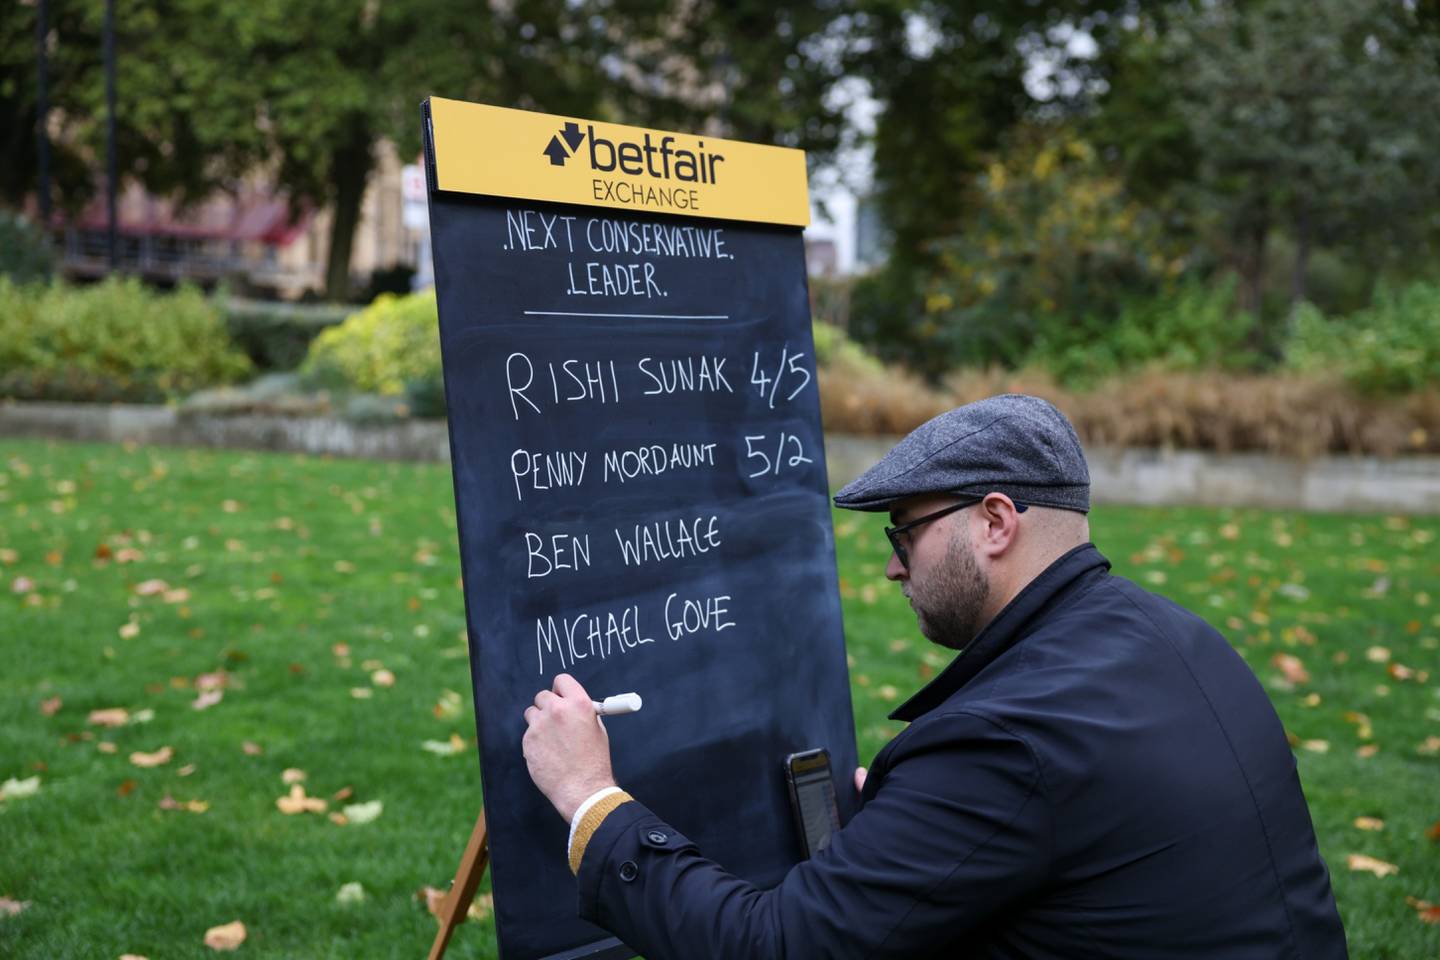 A bookmaker writes the voting odds for the next leader of the Conservative Party, and future UK prime minister, in the Westminster district of London, UK.